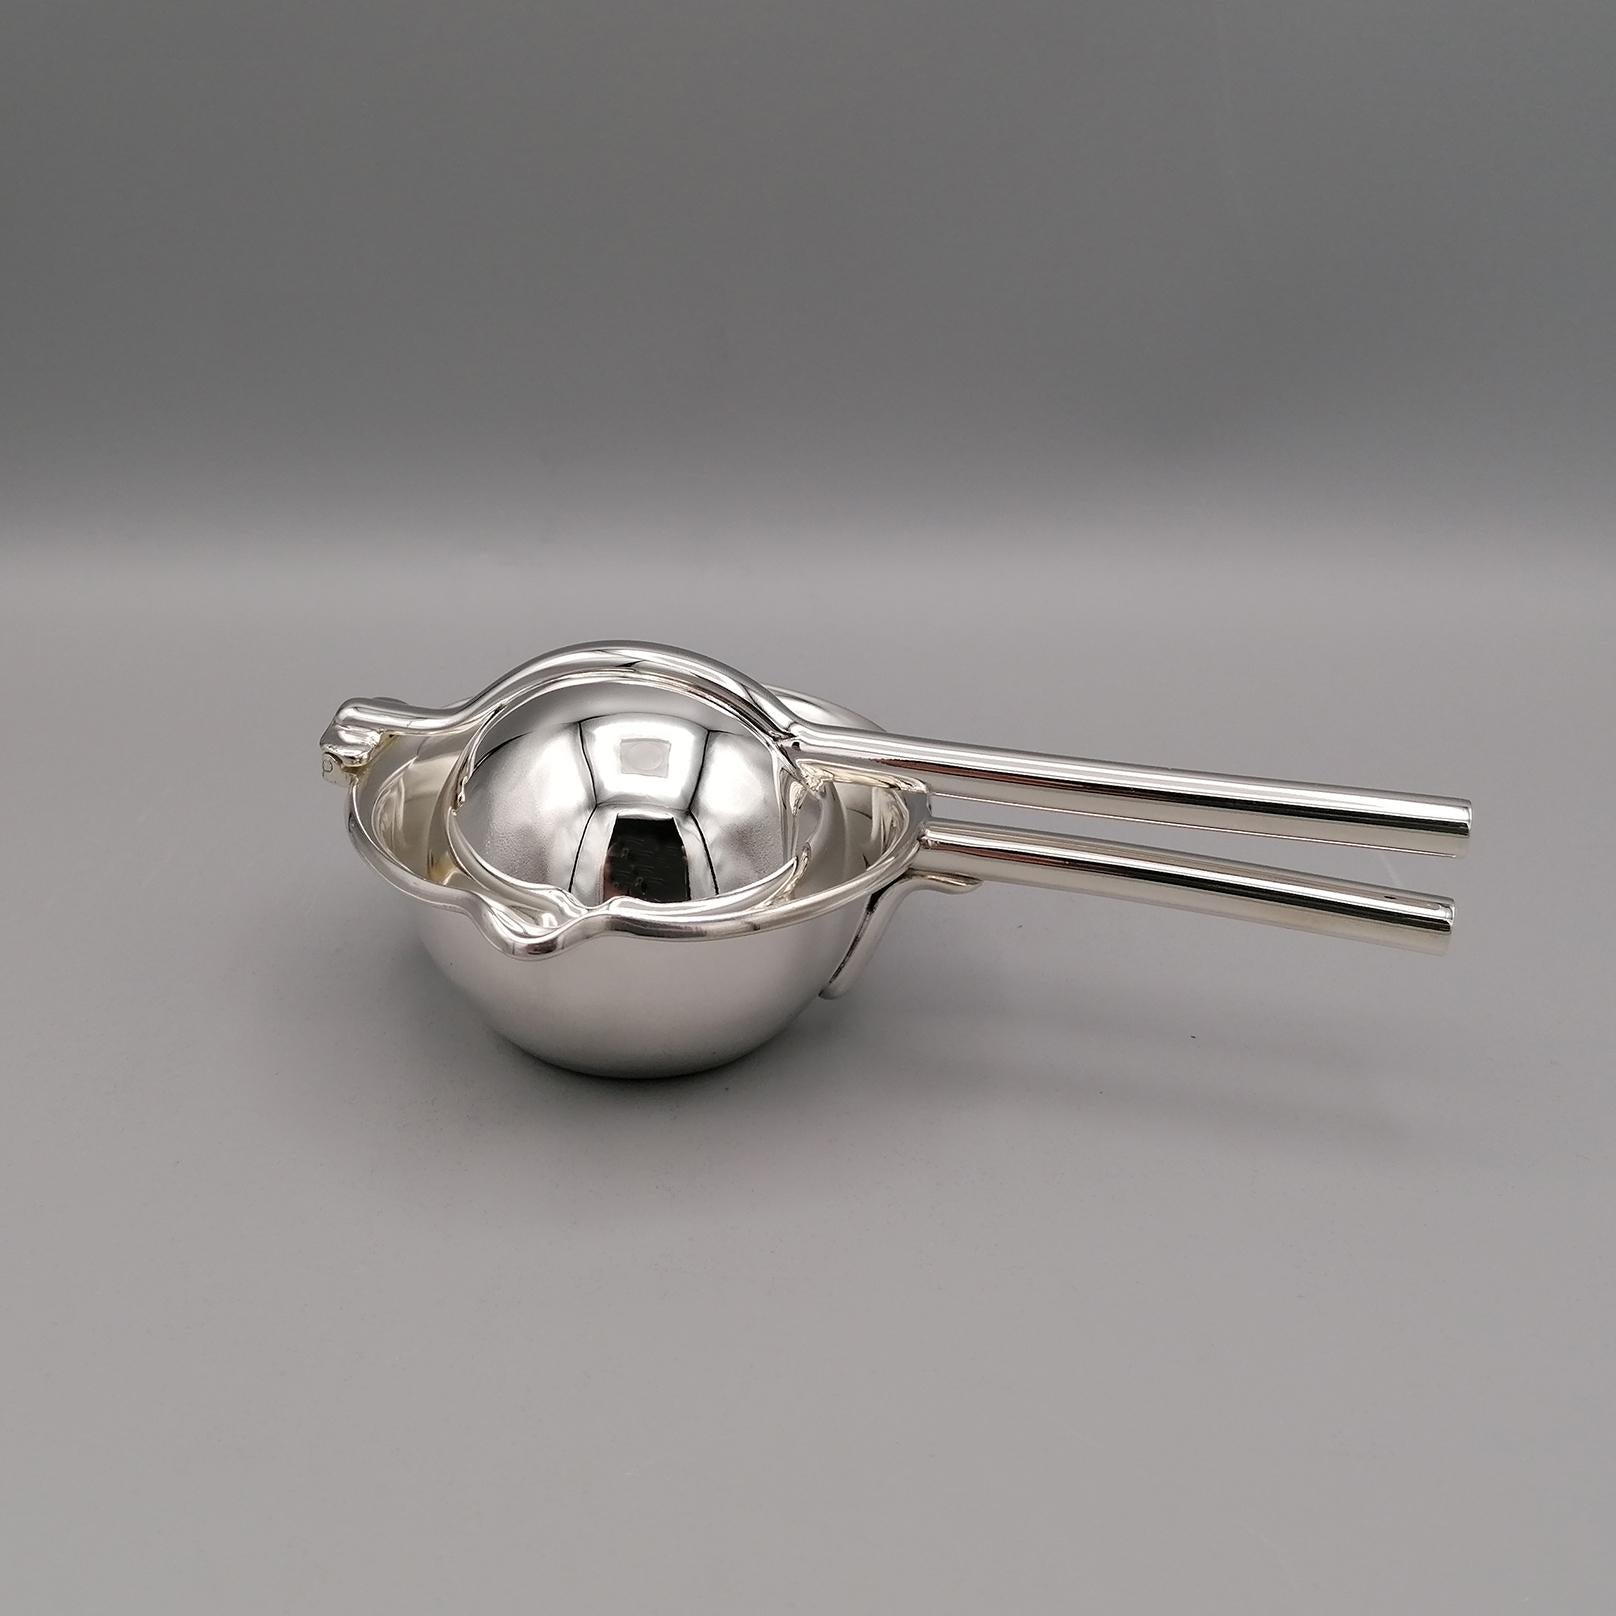 Squeezer in sterling silver.
The top is hinged with the bottom.
The body is rounded and the handle is made with two solid sterling silver bars.
In the lower part it has been embossed where half of the fruit must be placed to be crushed.
A spout